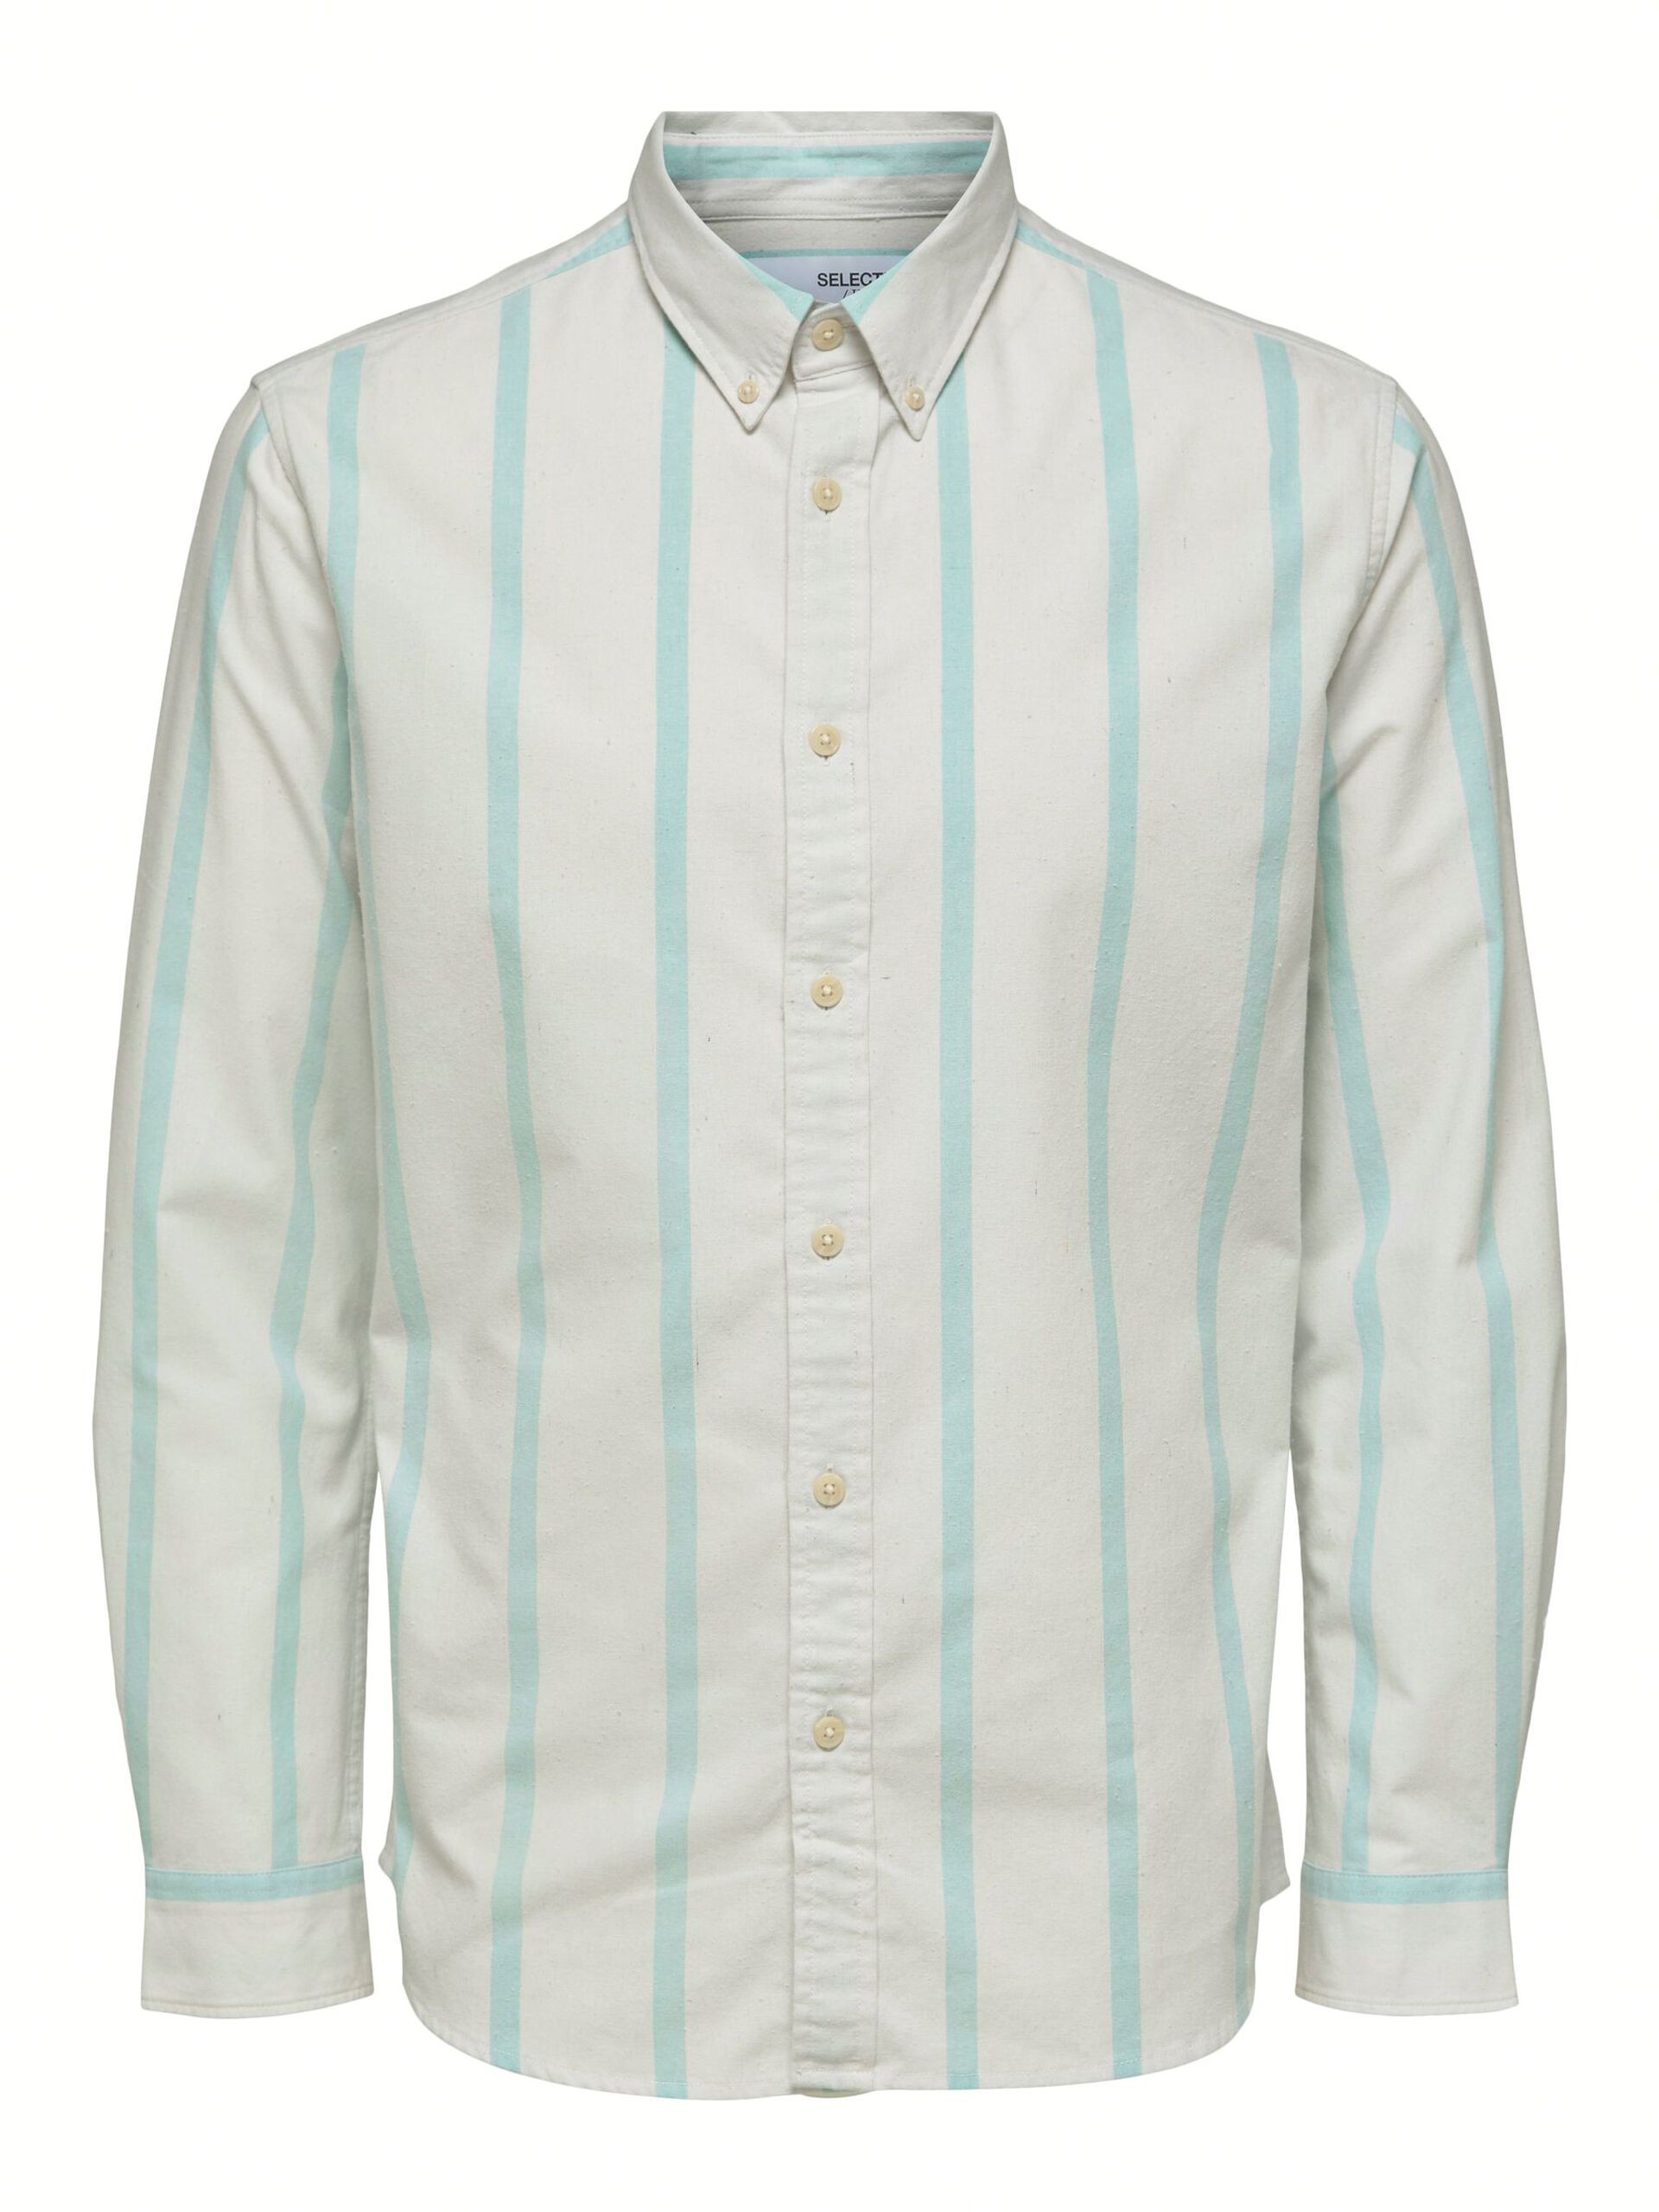 Selected Homme Chemise Rayée Blanche Et Menthe